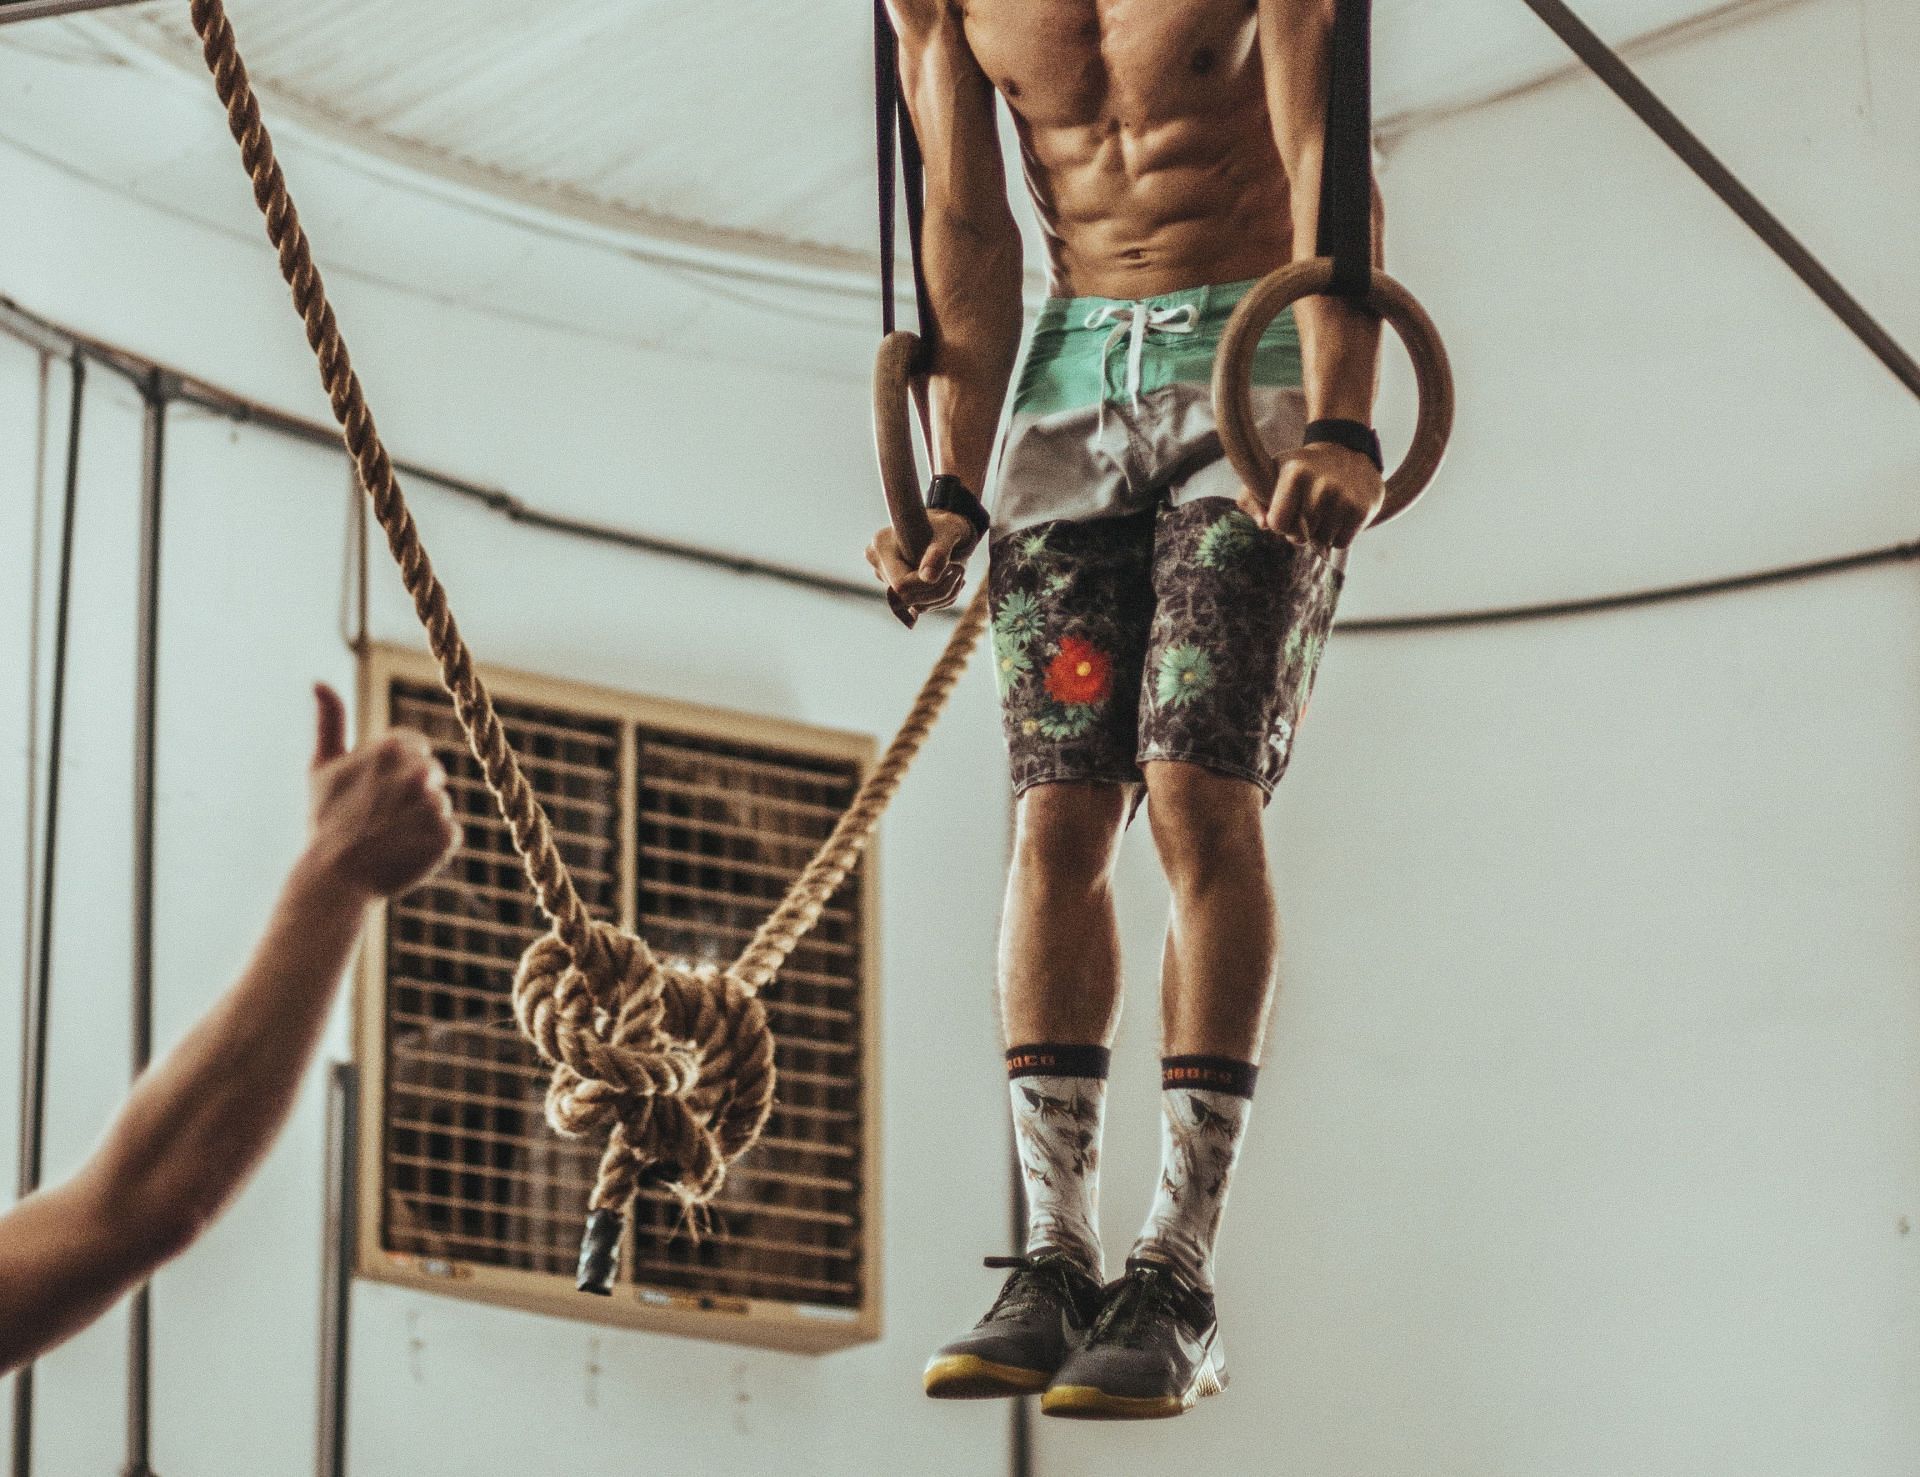 Hanging leg raises are one of the best ways to strengthen your abs. (Image via Unsplash / Victor Frietas)